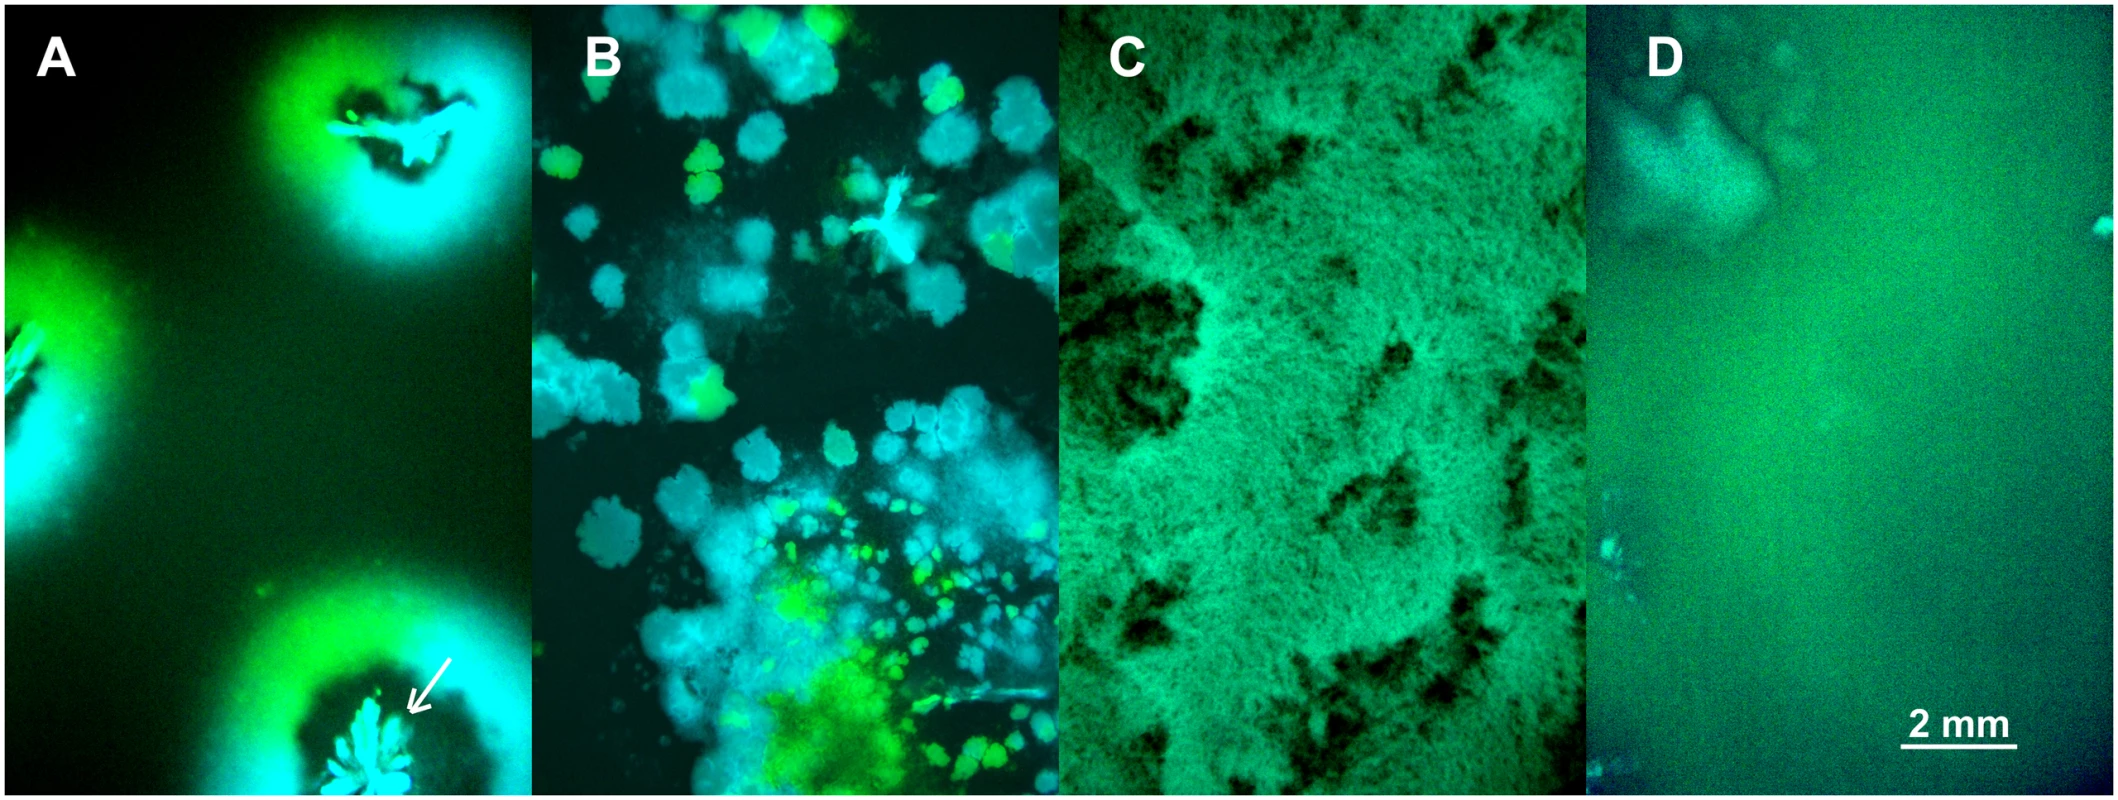 Competition of fluorescently marked virus (λCFP and λYFP—blue and green areas) during invasion into uninfected cells (black areas) at different degrees of mixing (<i>undisturbed</i>, <i>30s</i>, <i>24h</i>, <i>24h-wet</i>).